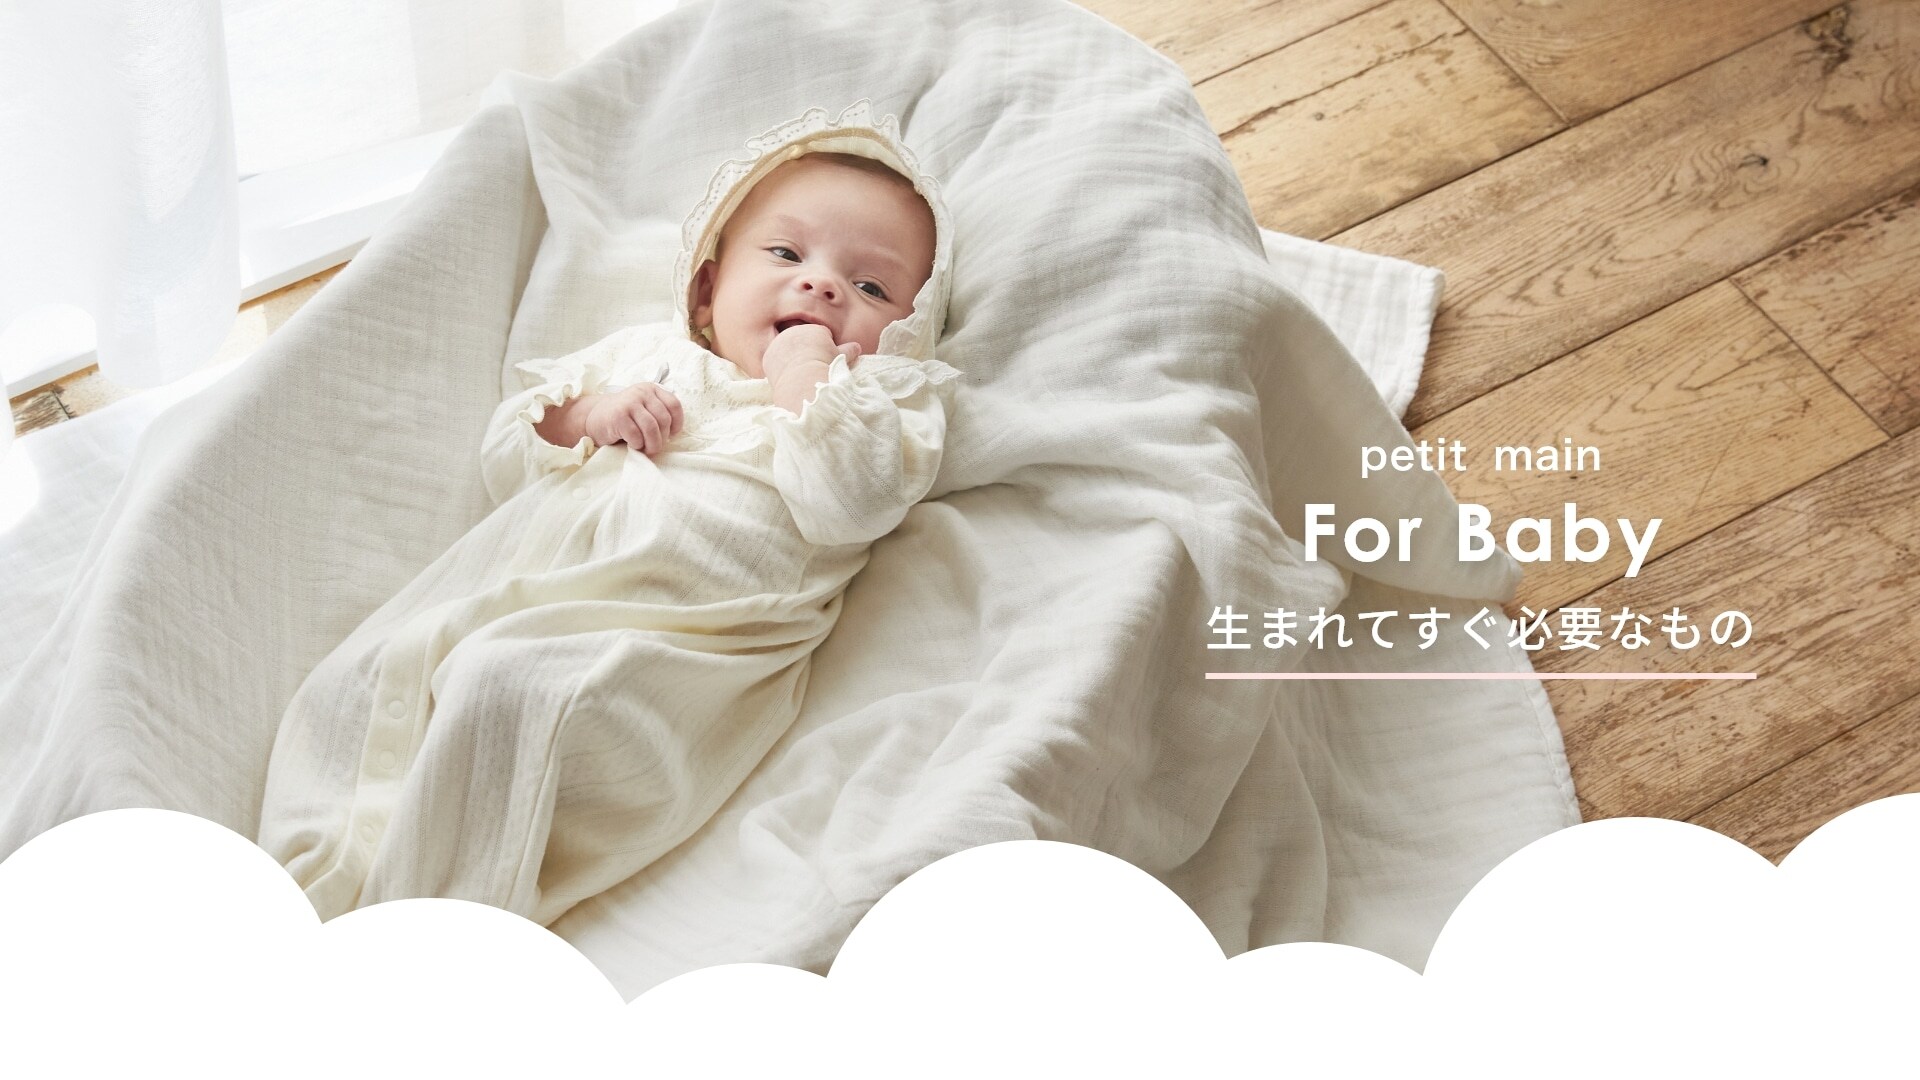 For Baby 生まれてすぐ必要なもの